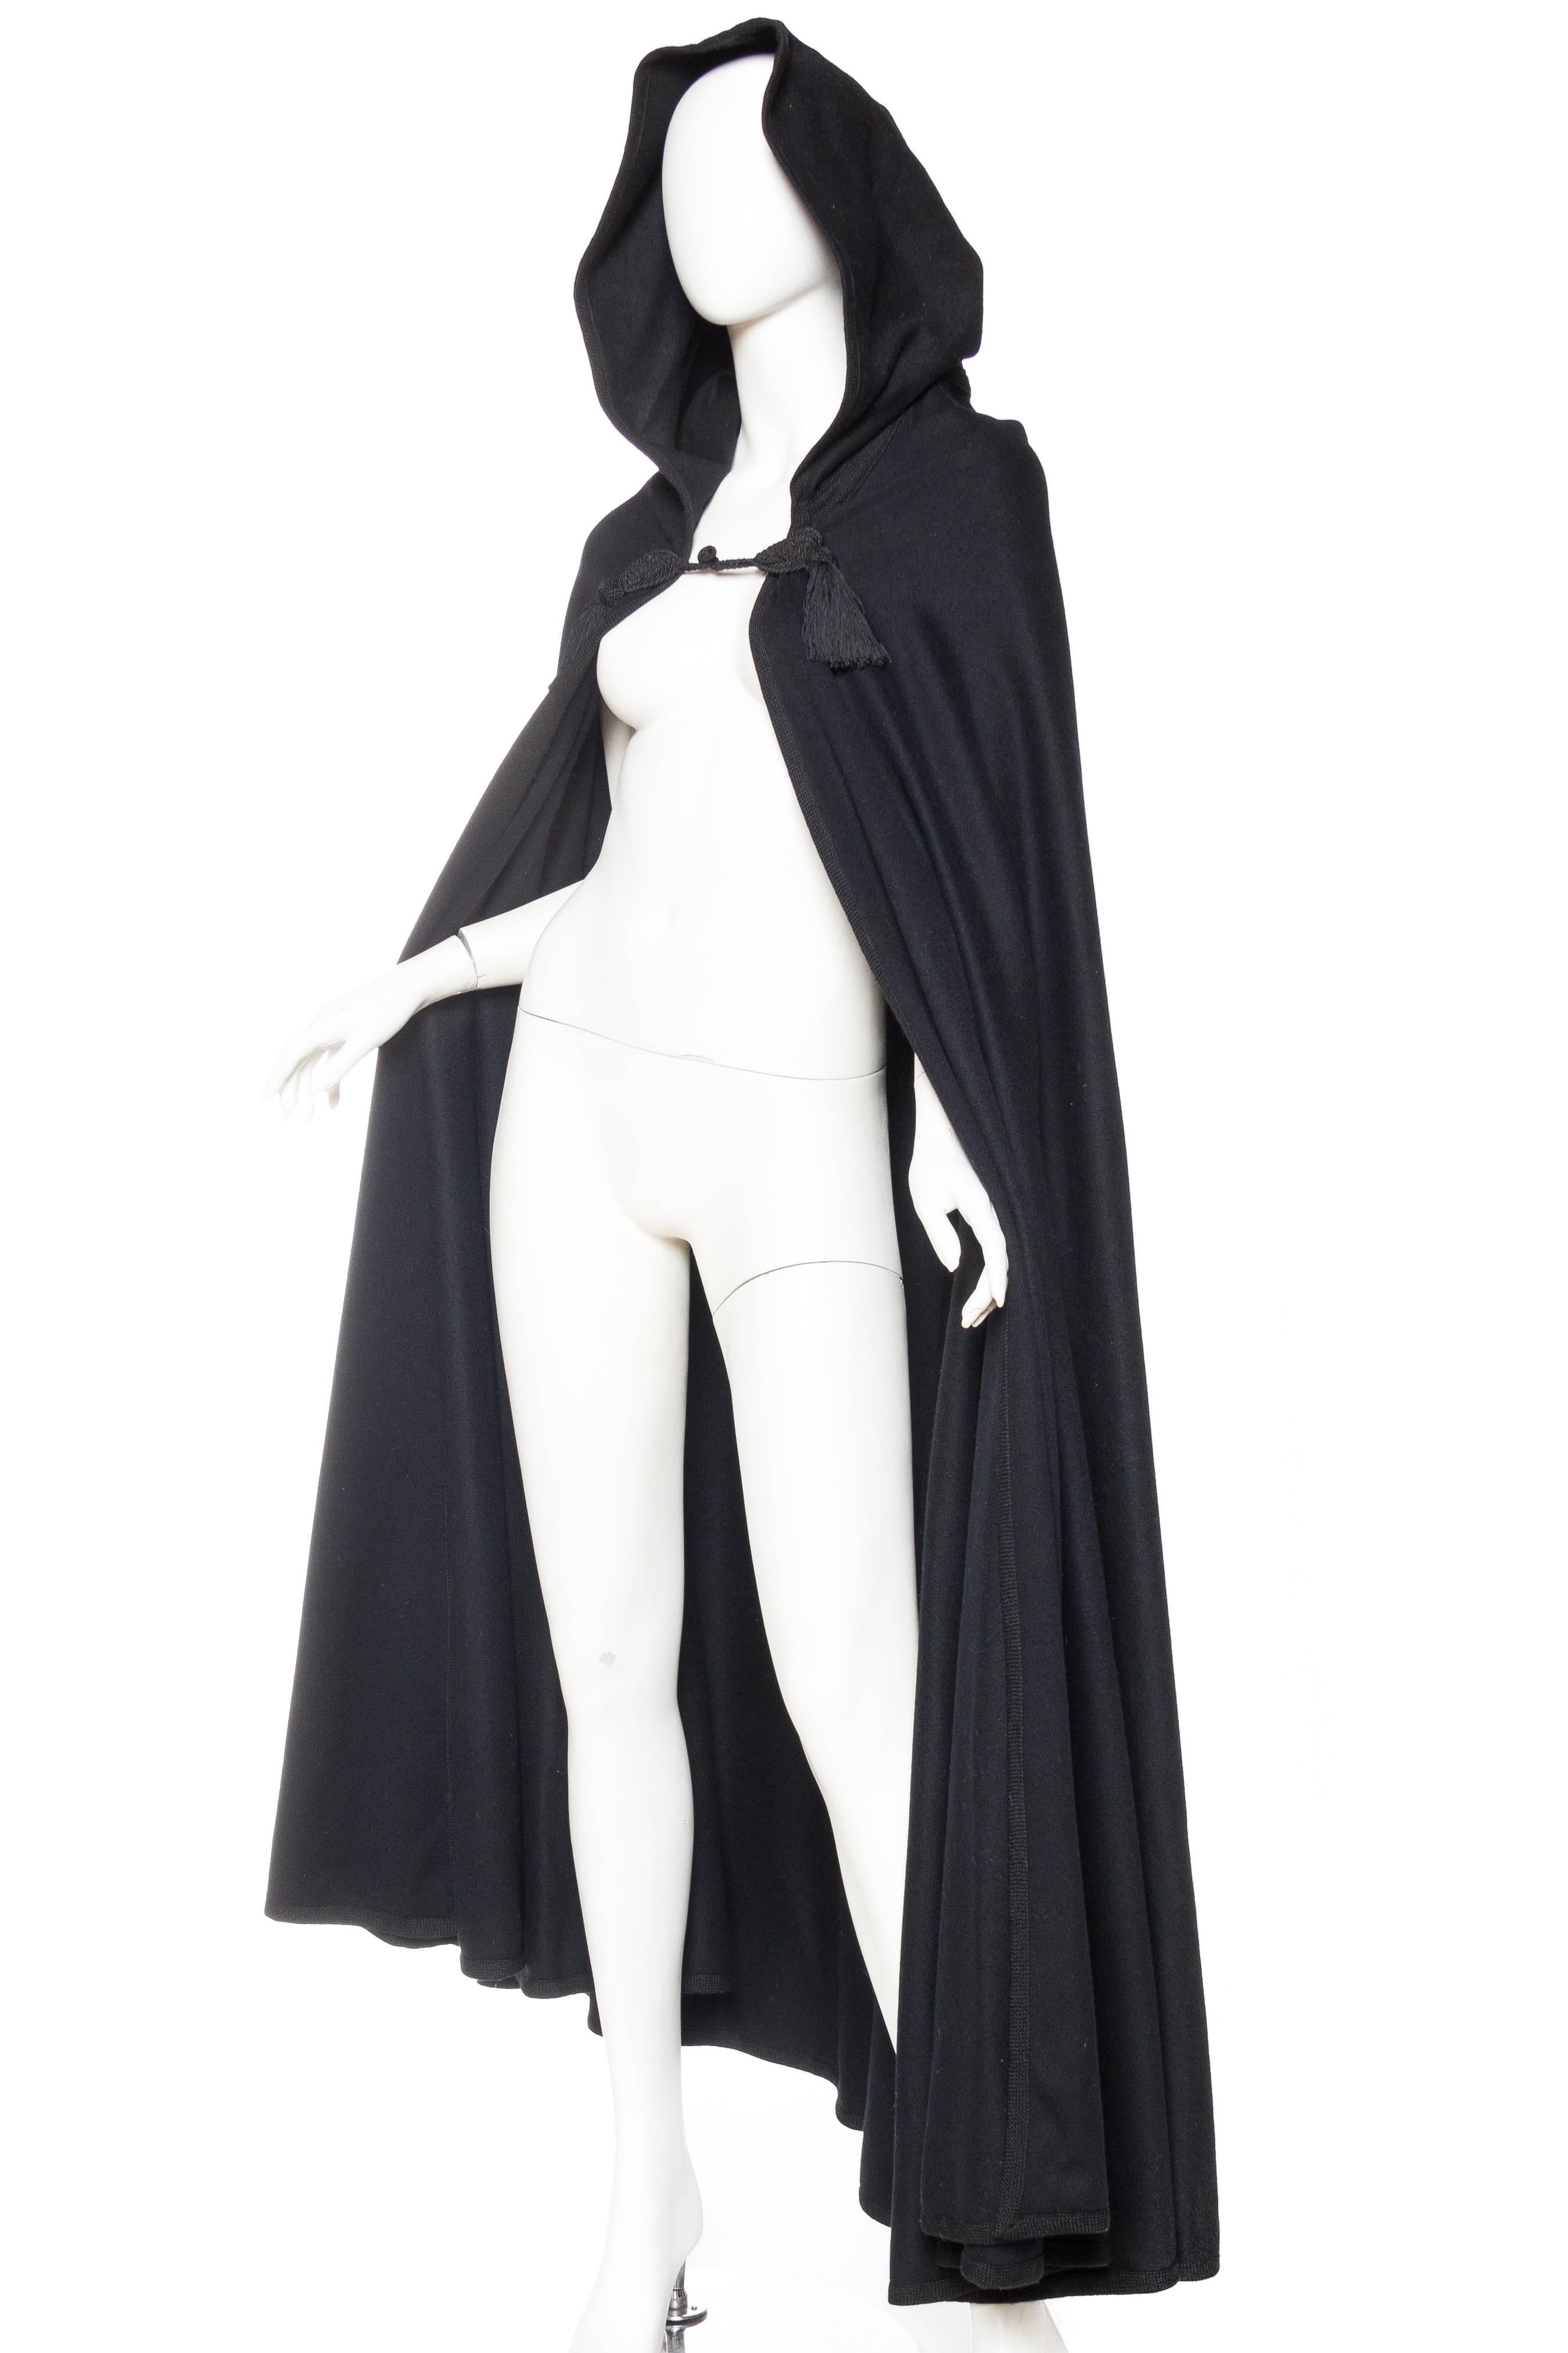 Yves Saint Laurent YSL Rive Gauche Cape with Hood, 1970s  In Excellent Condition In New York, NY